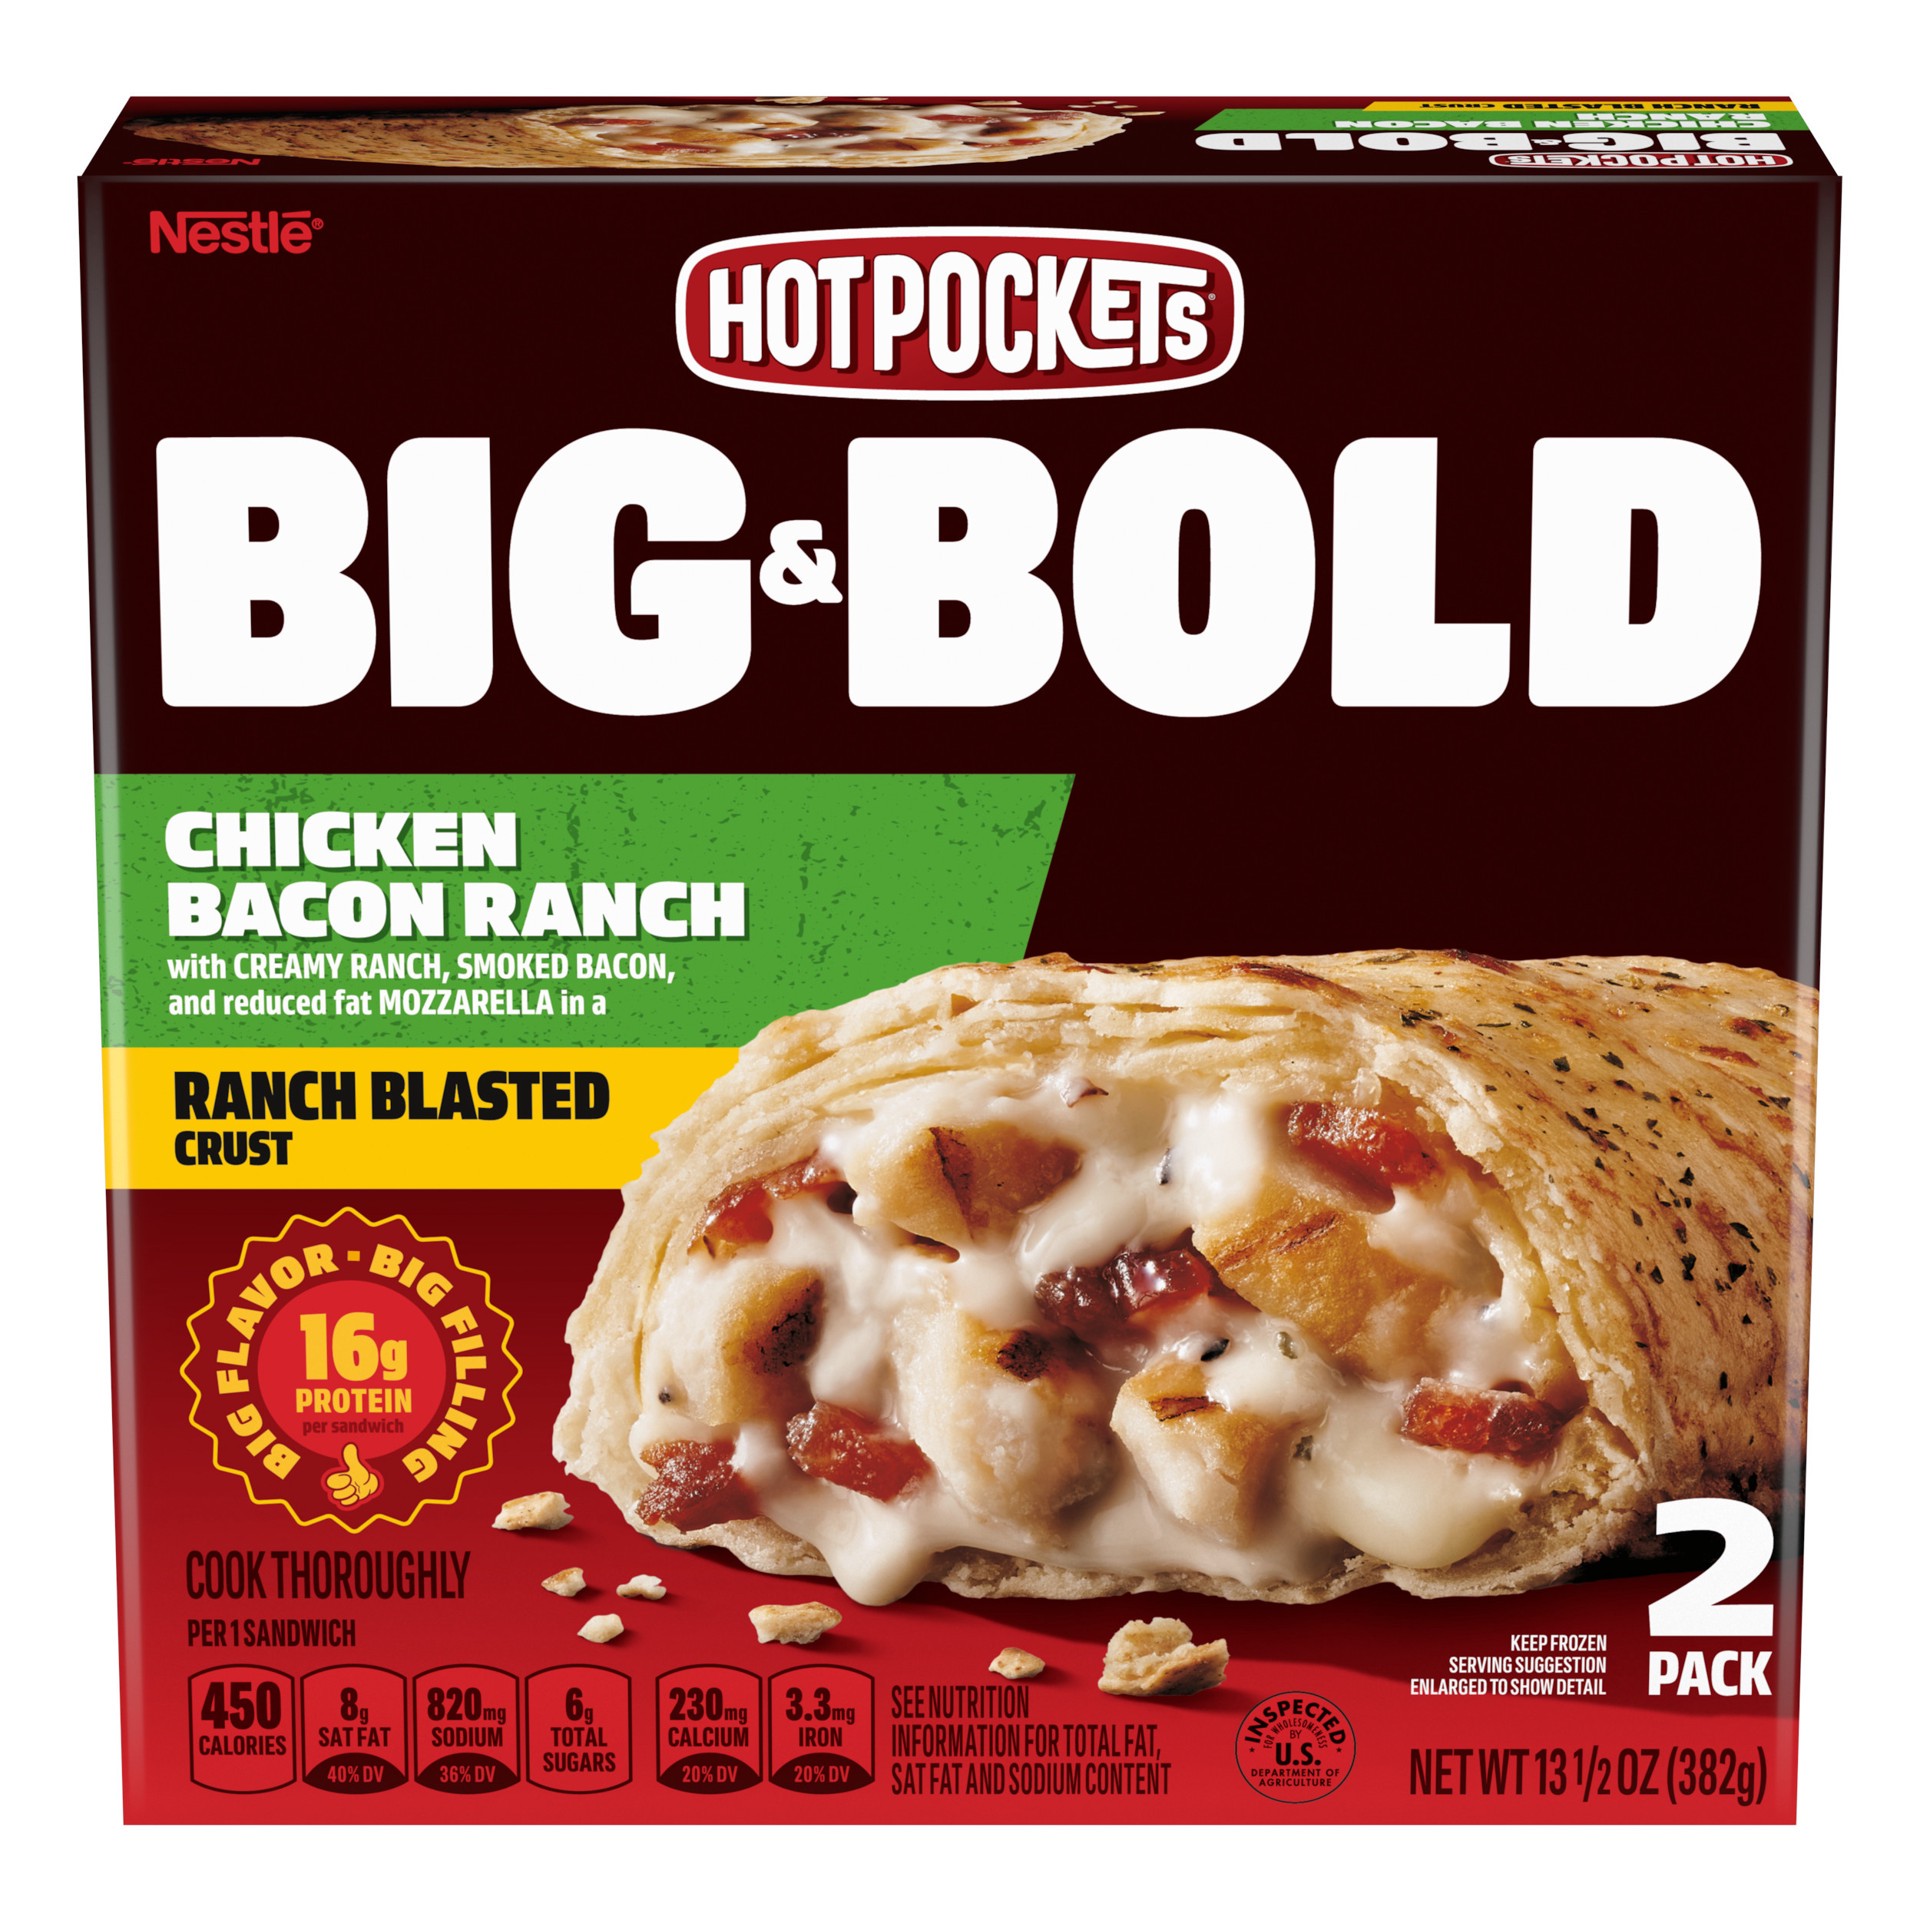 slide 1 of 8, Hot Pockets Big & Bold Chicken Bacon Ranch Frozen Snacks, Frozen Sandwiches, 2 Count Microwave Snacks, 13.5 oz